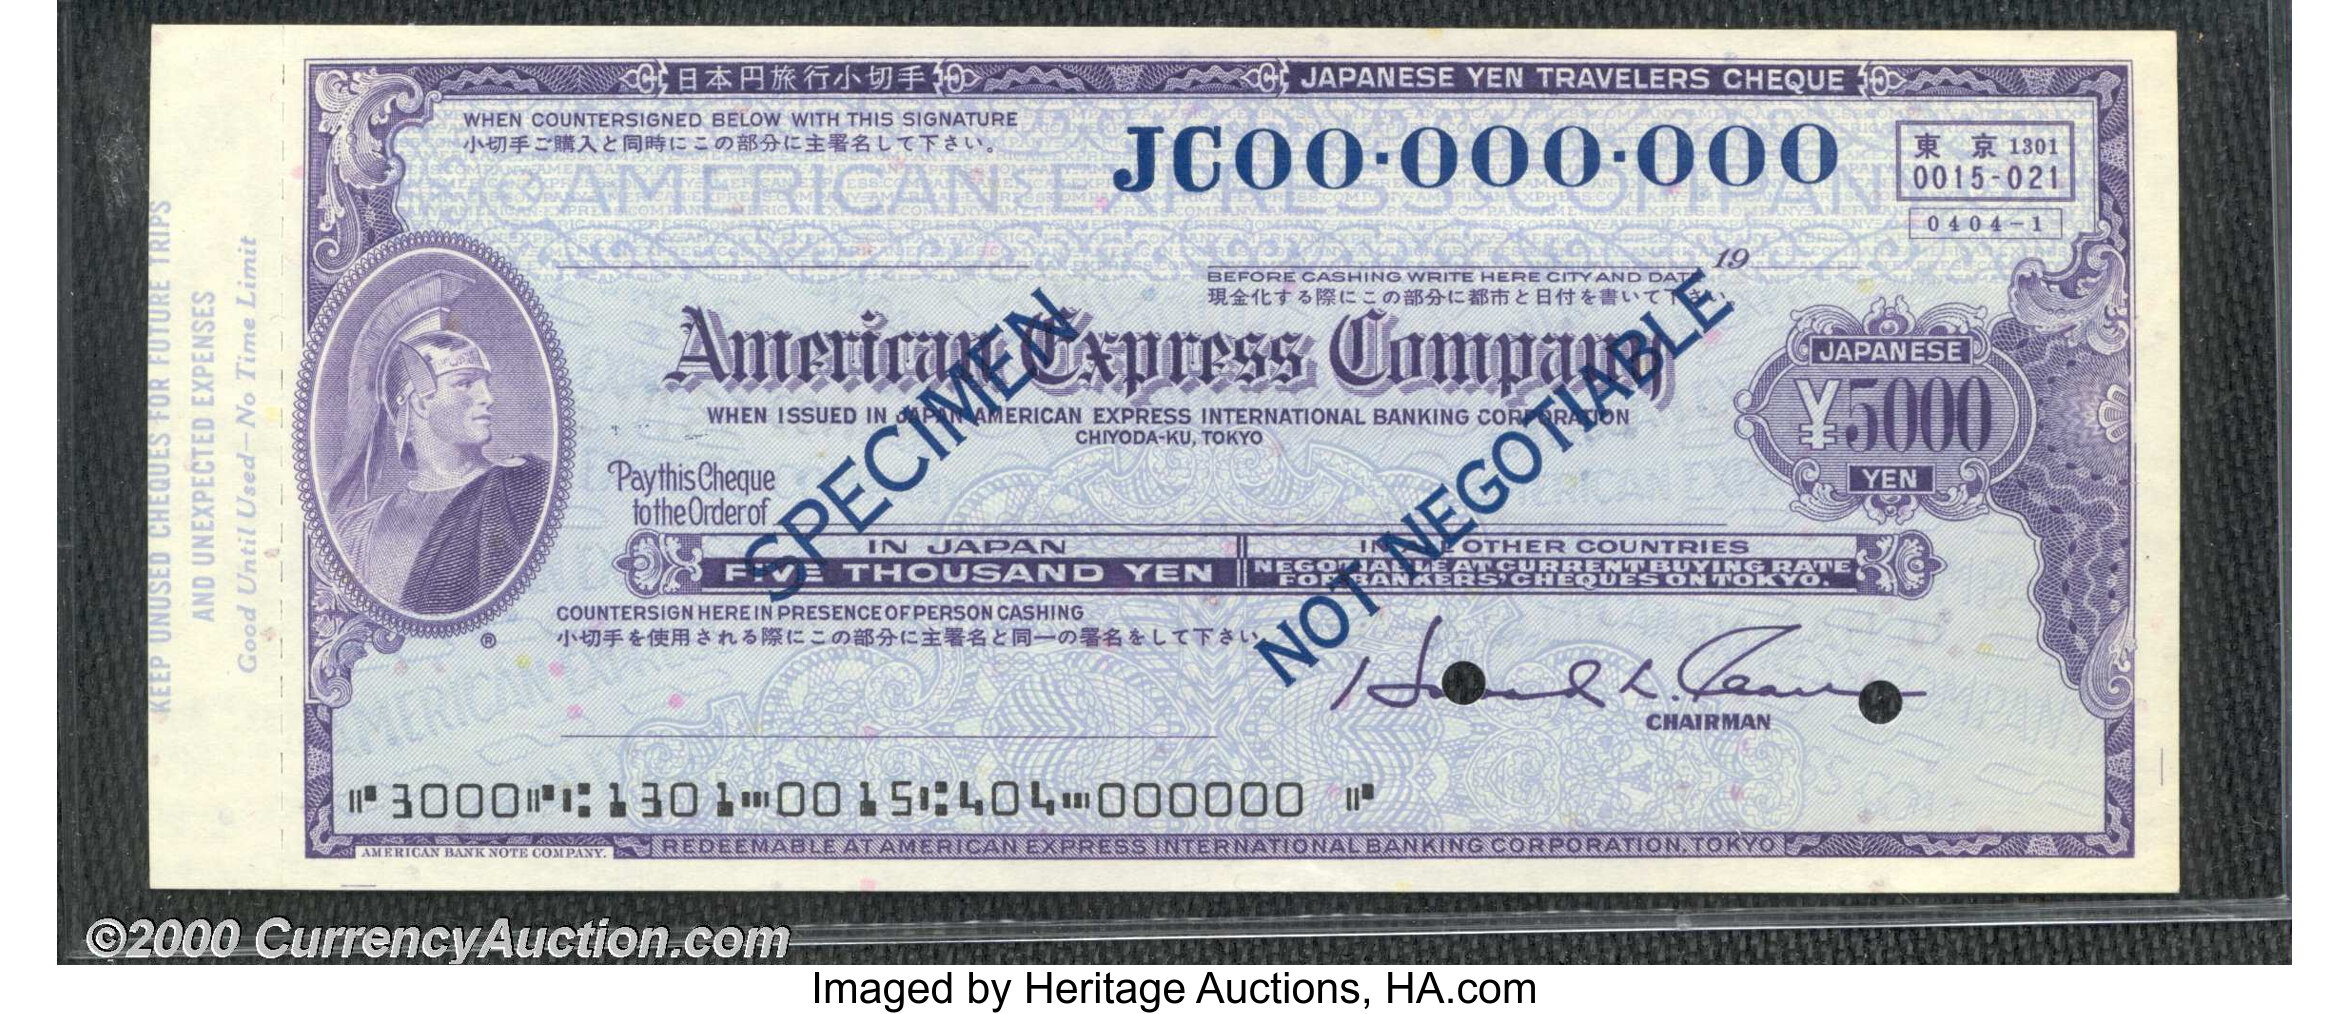 American Express Travelers Cheques - slideshare